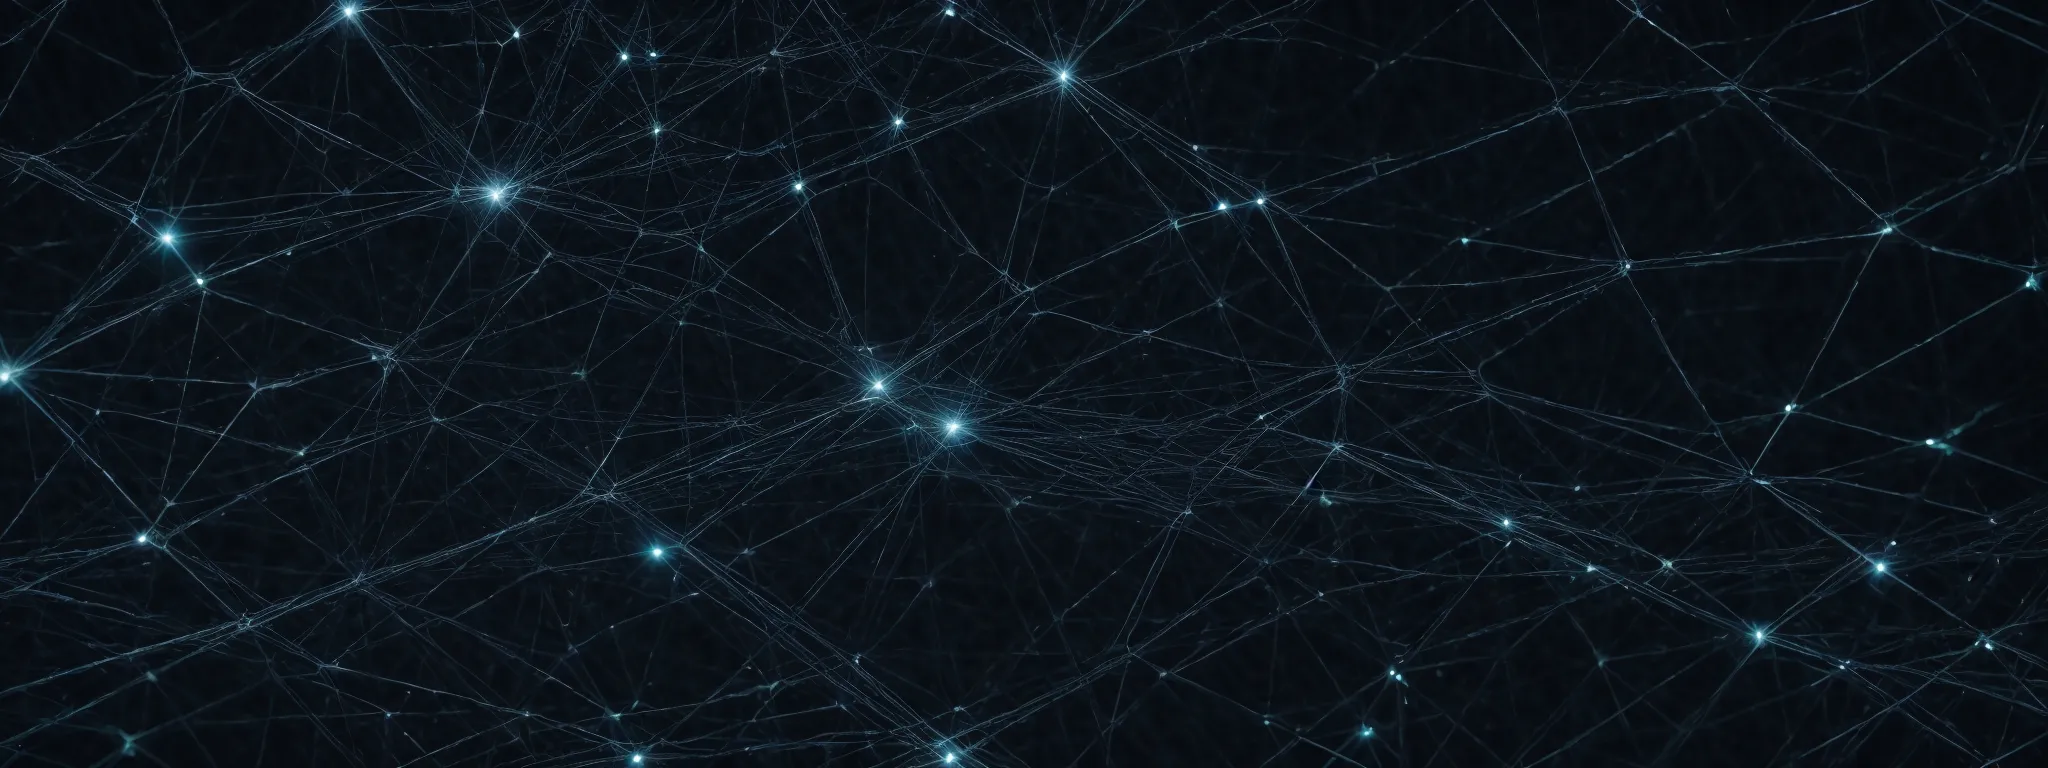 a web of interconnected nodes symbolizing a strong network created by high-quality, link-attracting content.